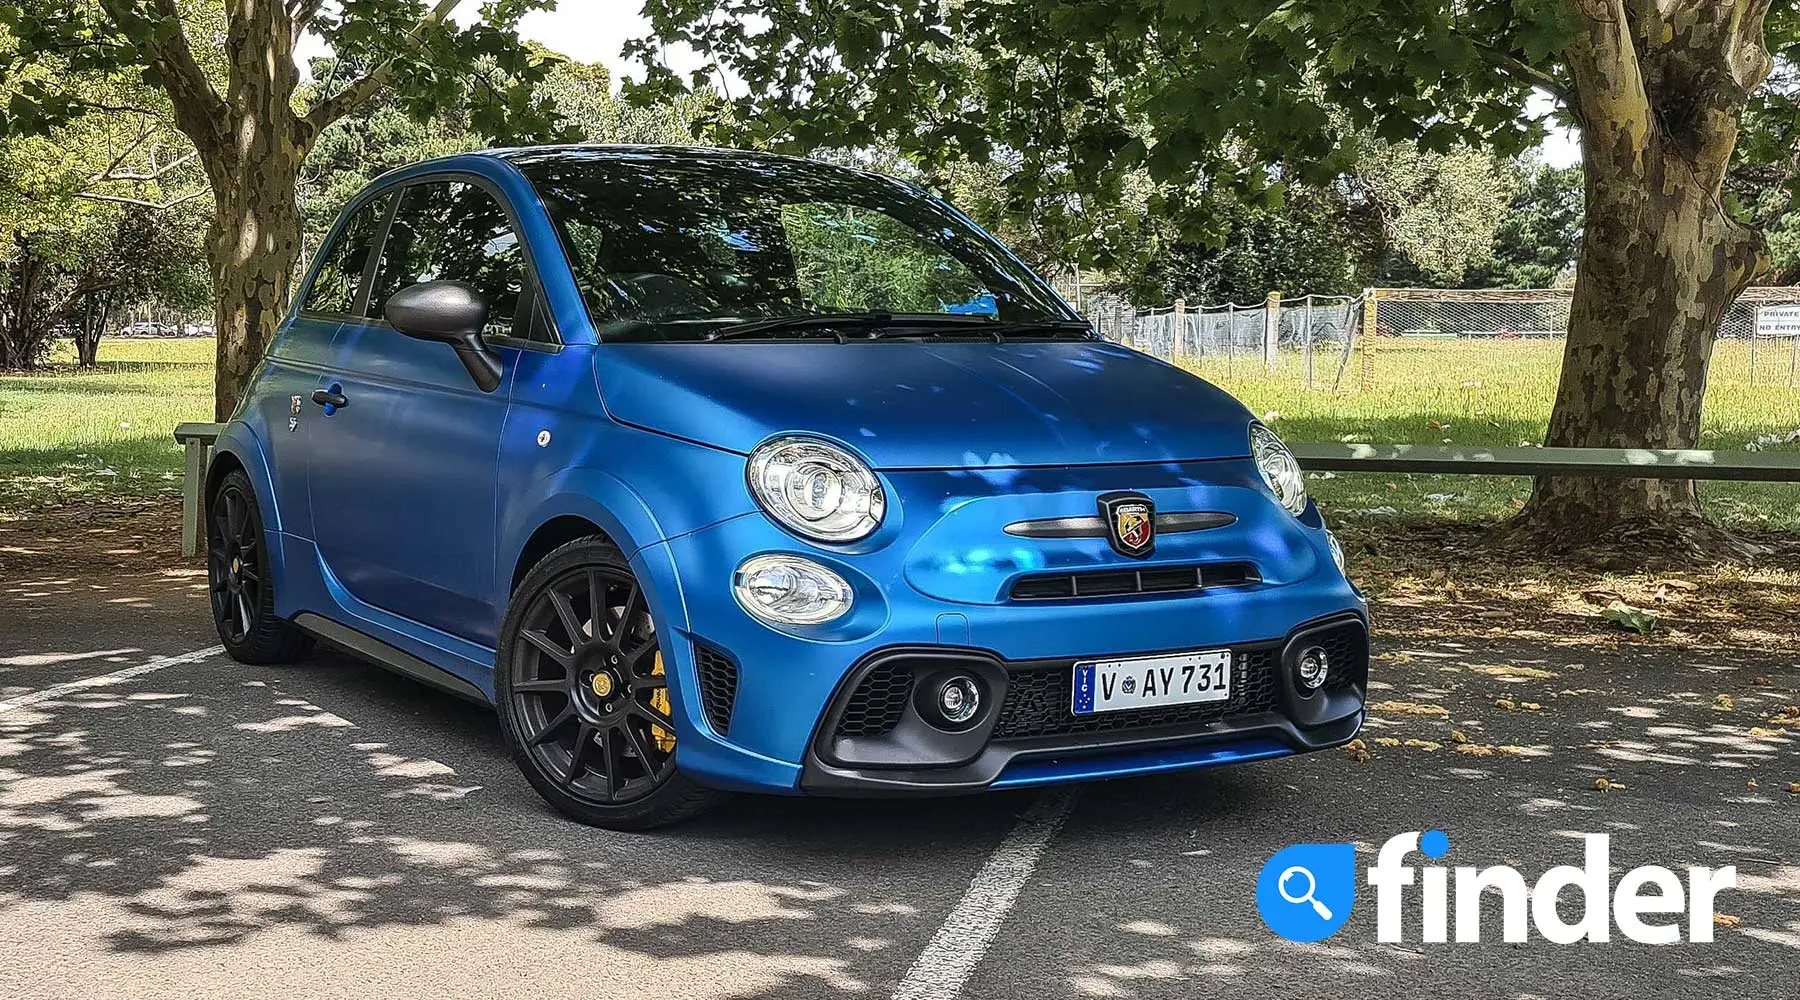 2022 ABARTH 595 COMPETIZIONE - LET'S PLAY AGAIN